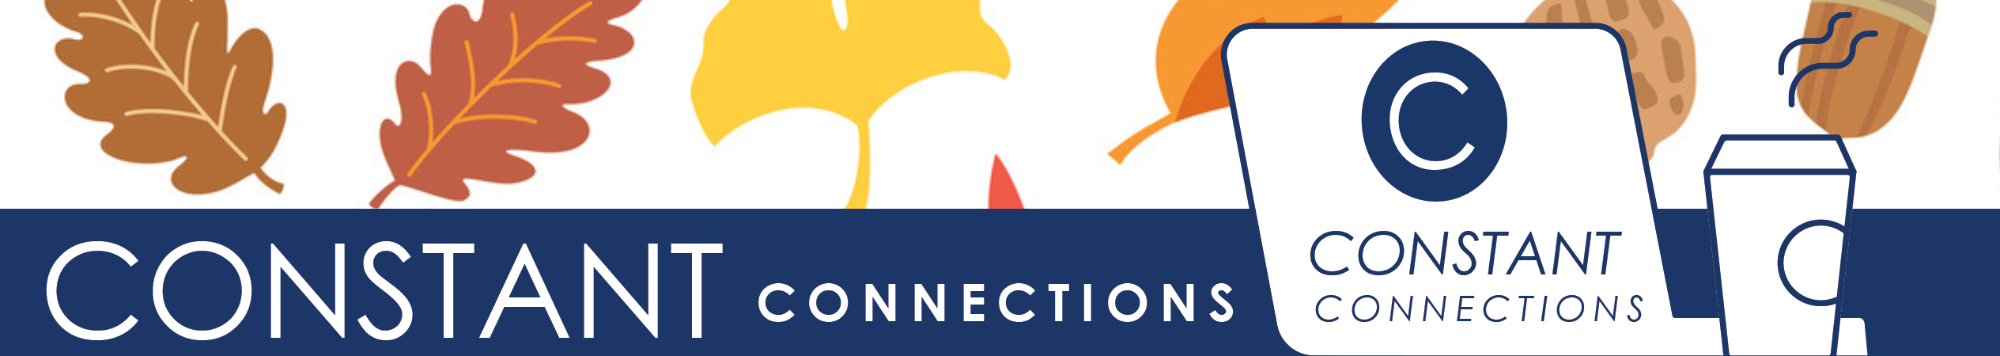 CONSTANT connections banner with leave background